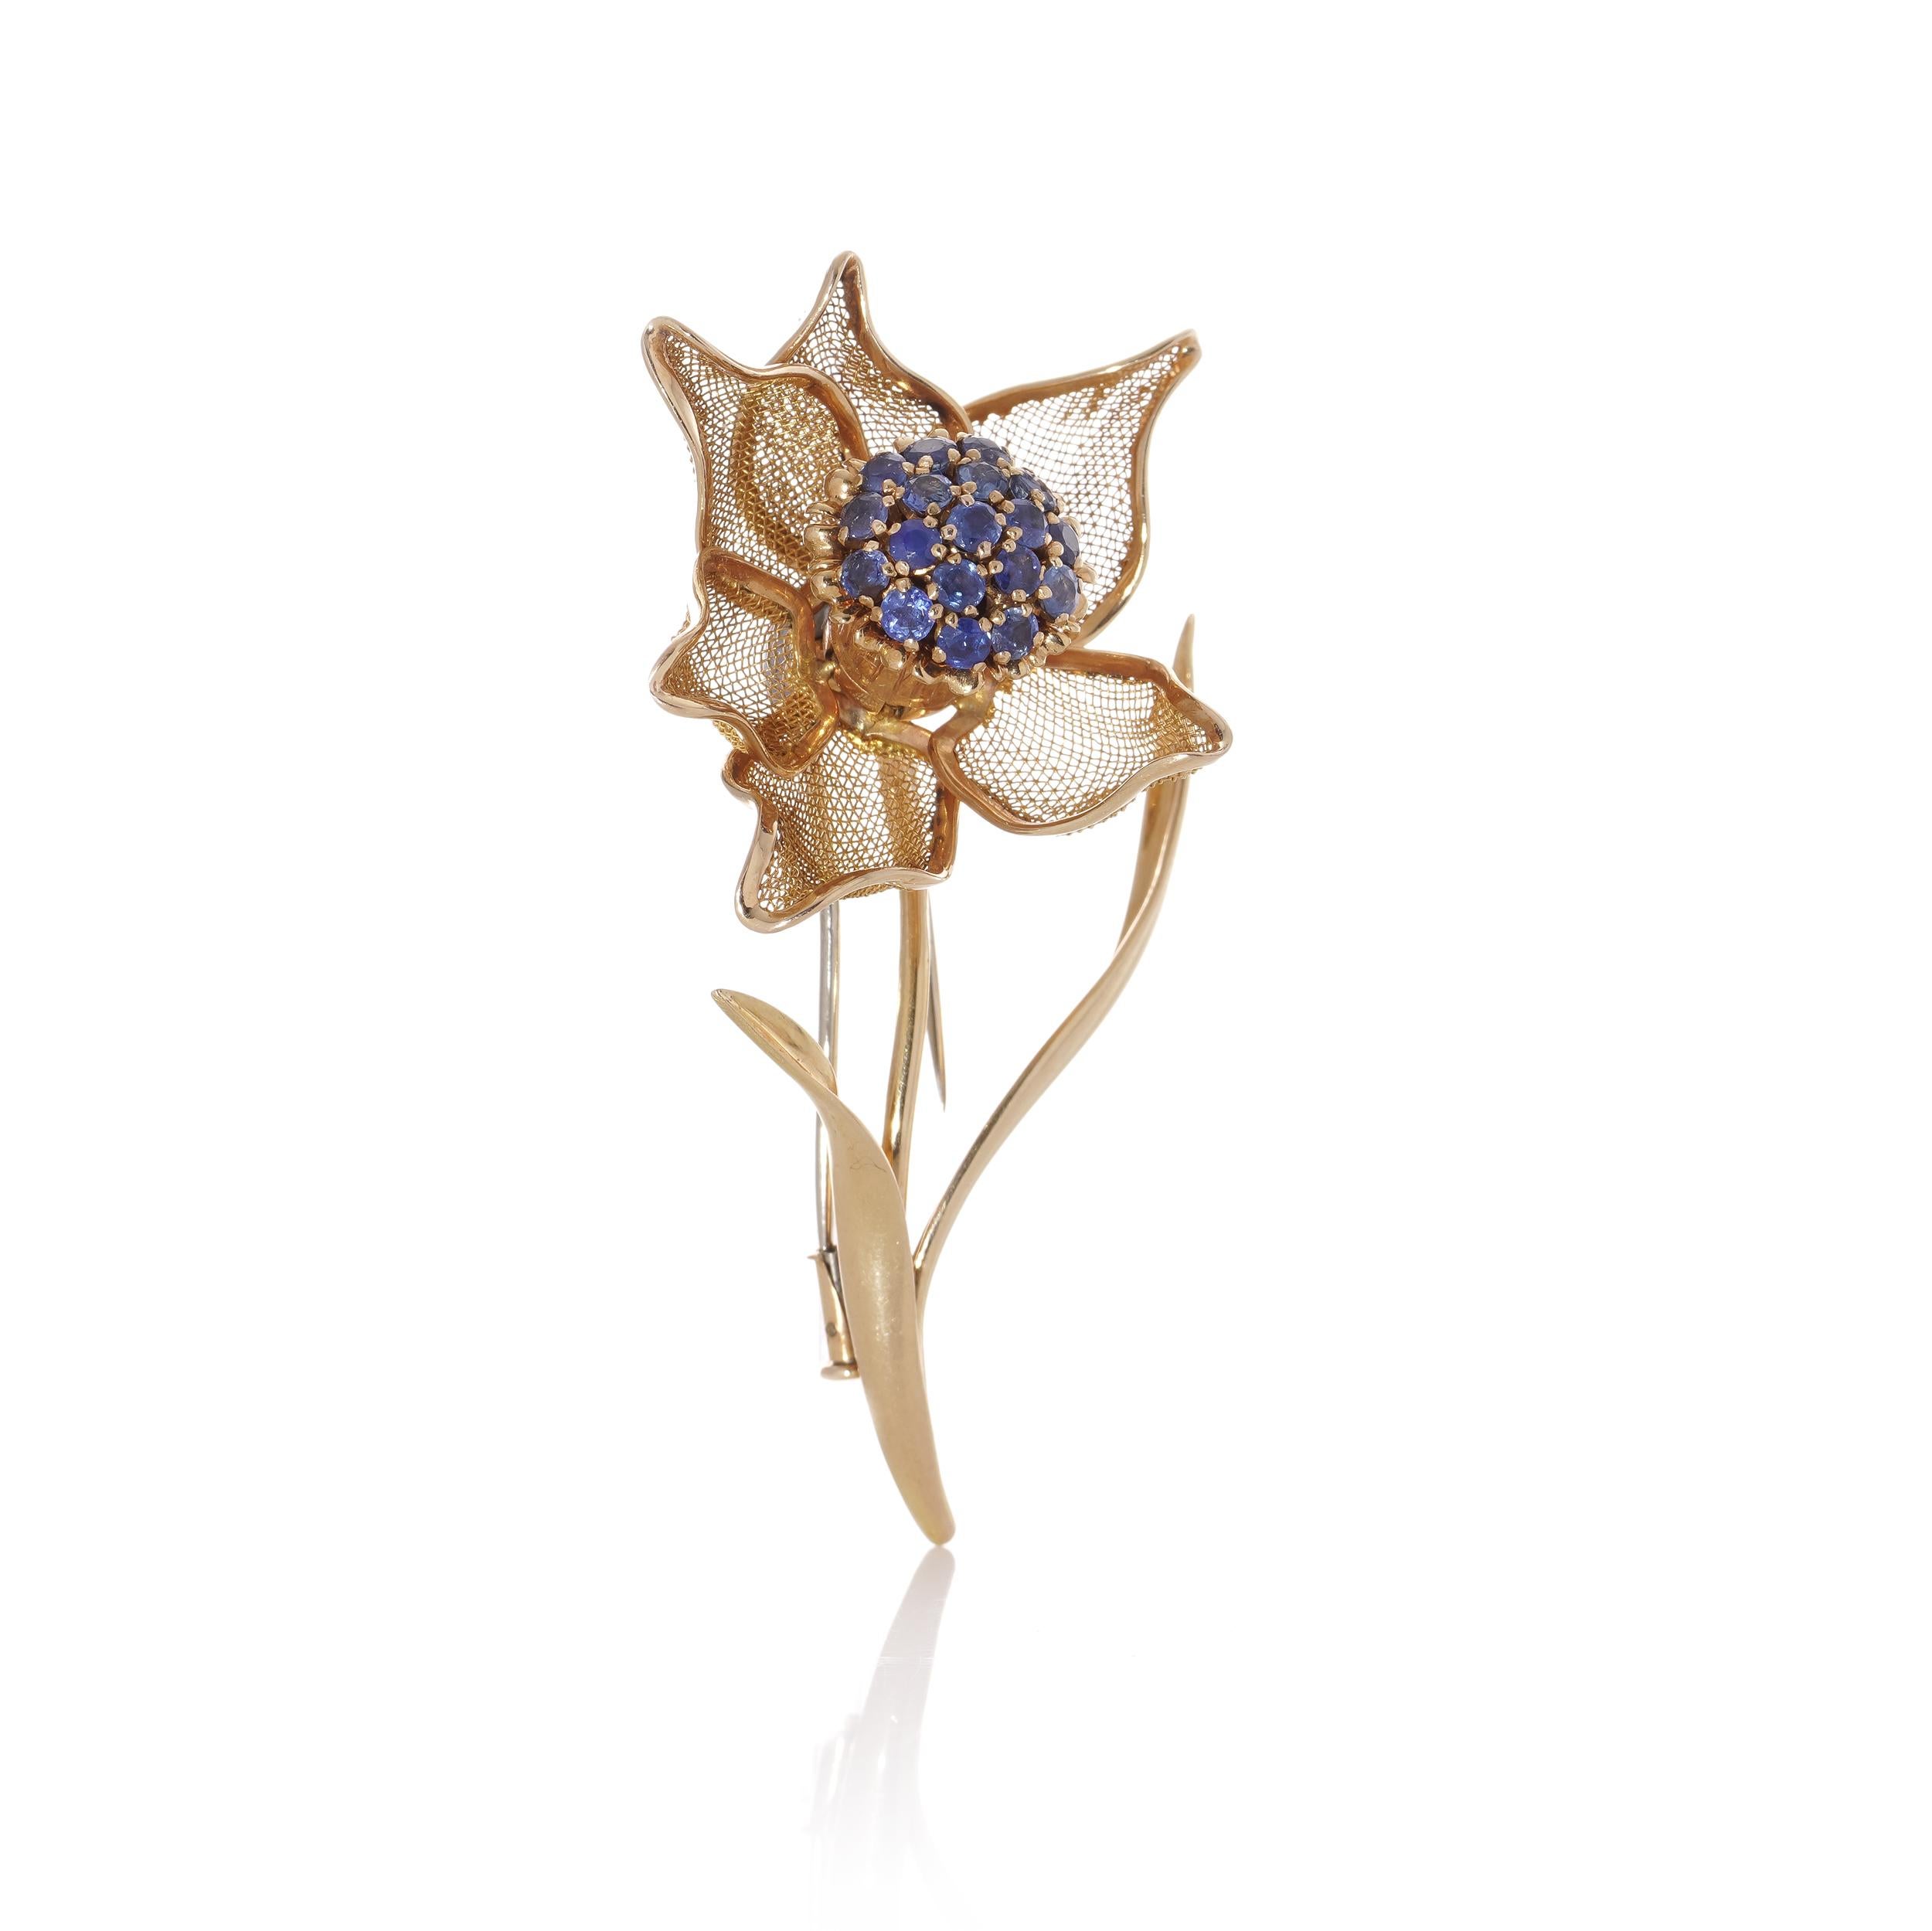 Vintage 18kt. gold floral form brooch with hinged mesh petals set with sapphires For Sale 3